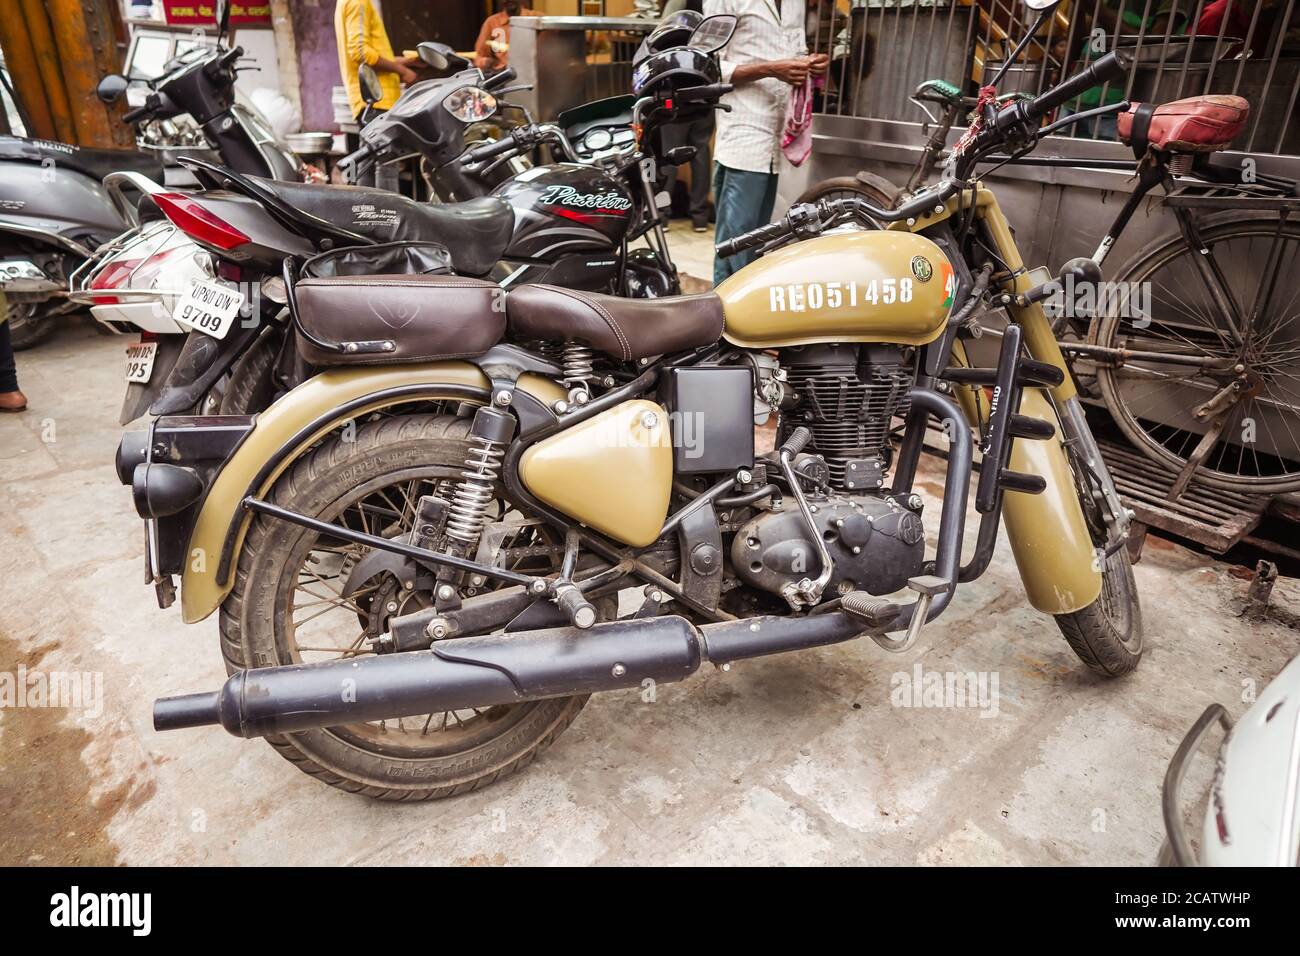 Agra / India - February 22, 2020: Traditional Royal Enfield motorcycle of military use parked in the center of Agra city Stock Photo